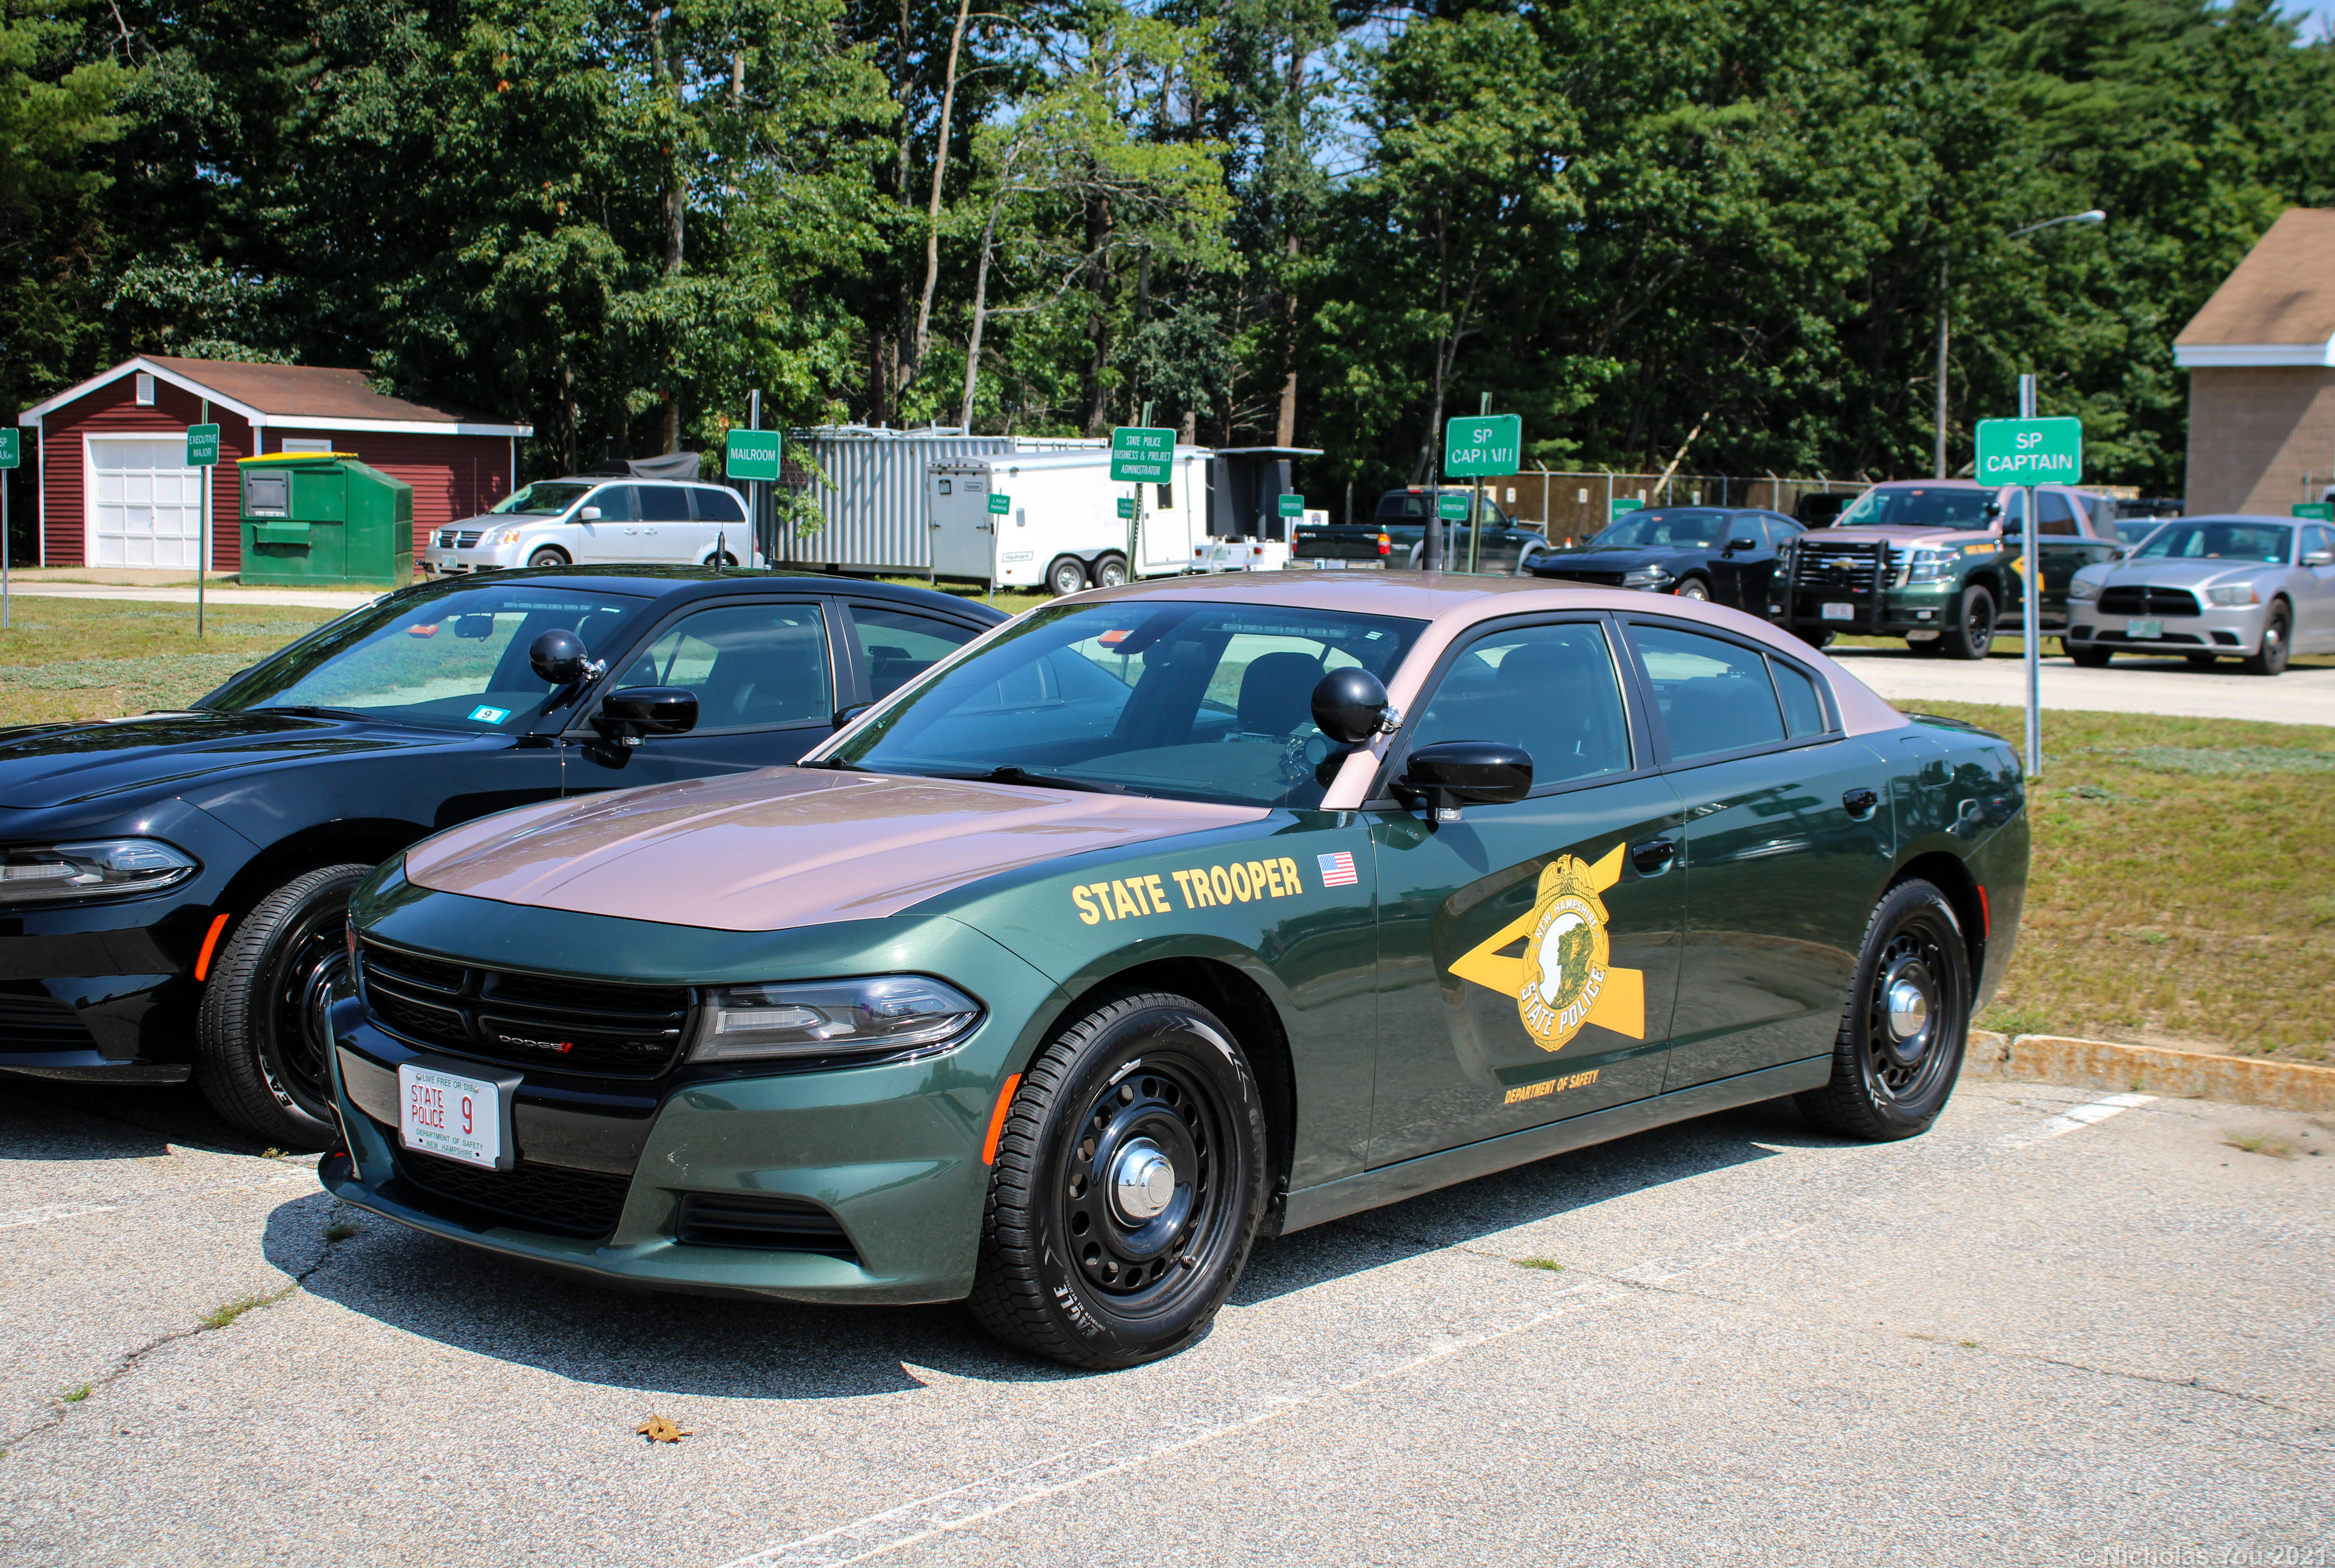 A photo  of New Hampshire State Police
            Cruiser 9, a 2015-2019 Dodge Charger             taken by Nicholas You